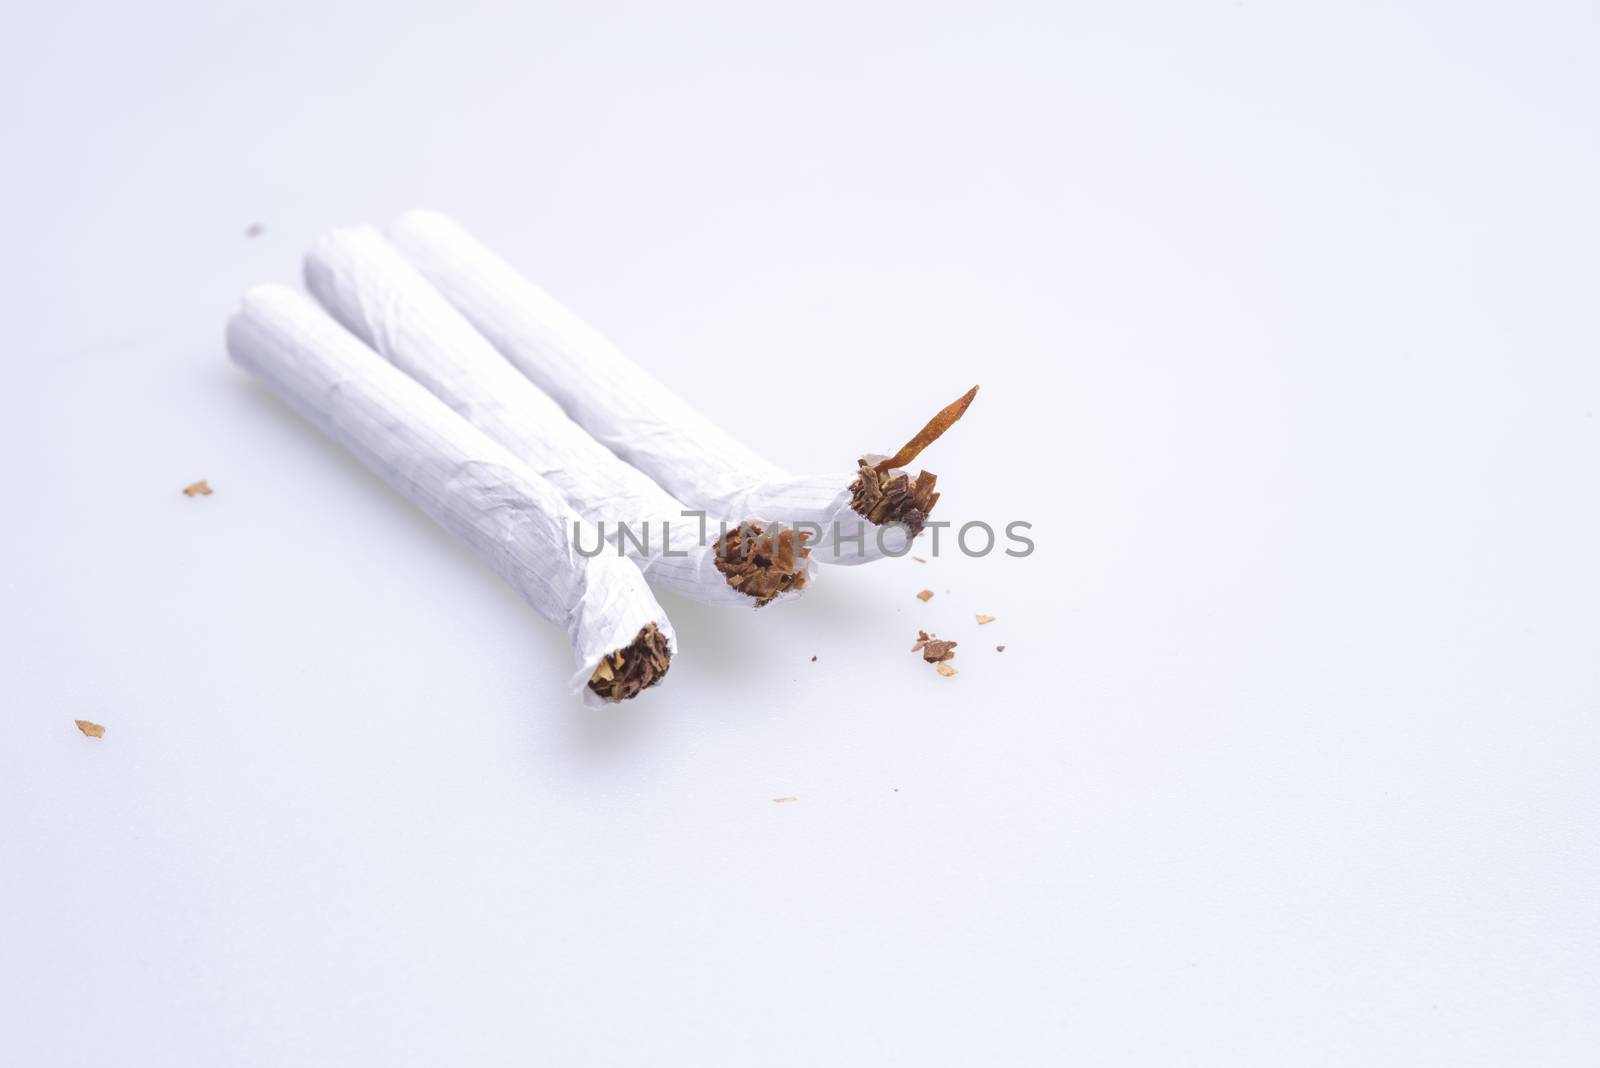 Squeezed cigarettes on table by savcoco